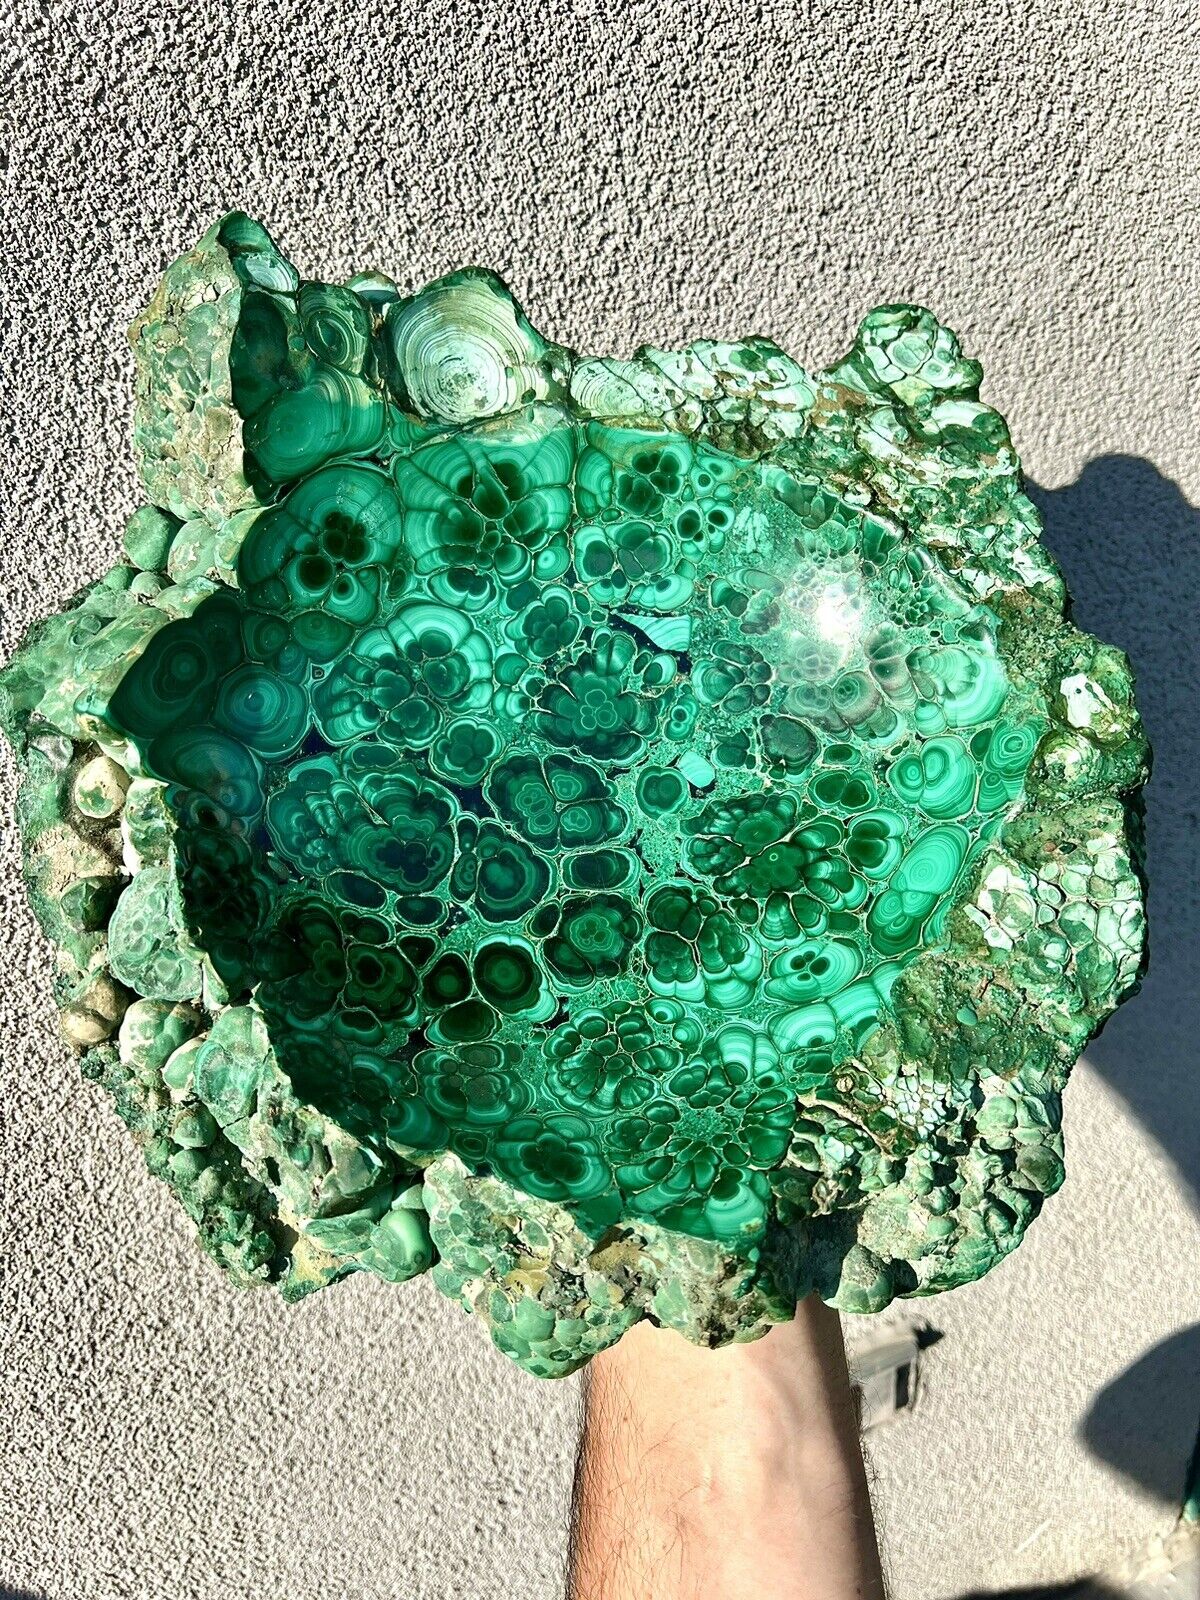 25 Pound: Malachite Plume Polished / Rough Bowl from DRC, Africa